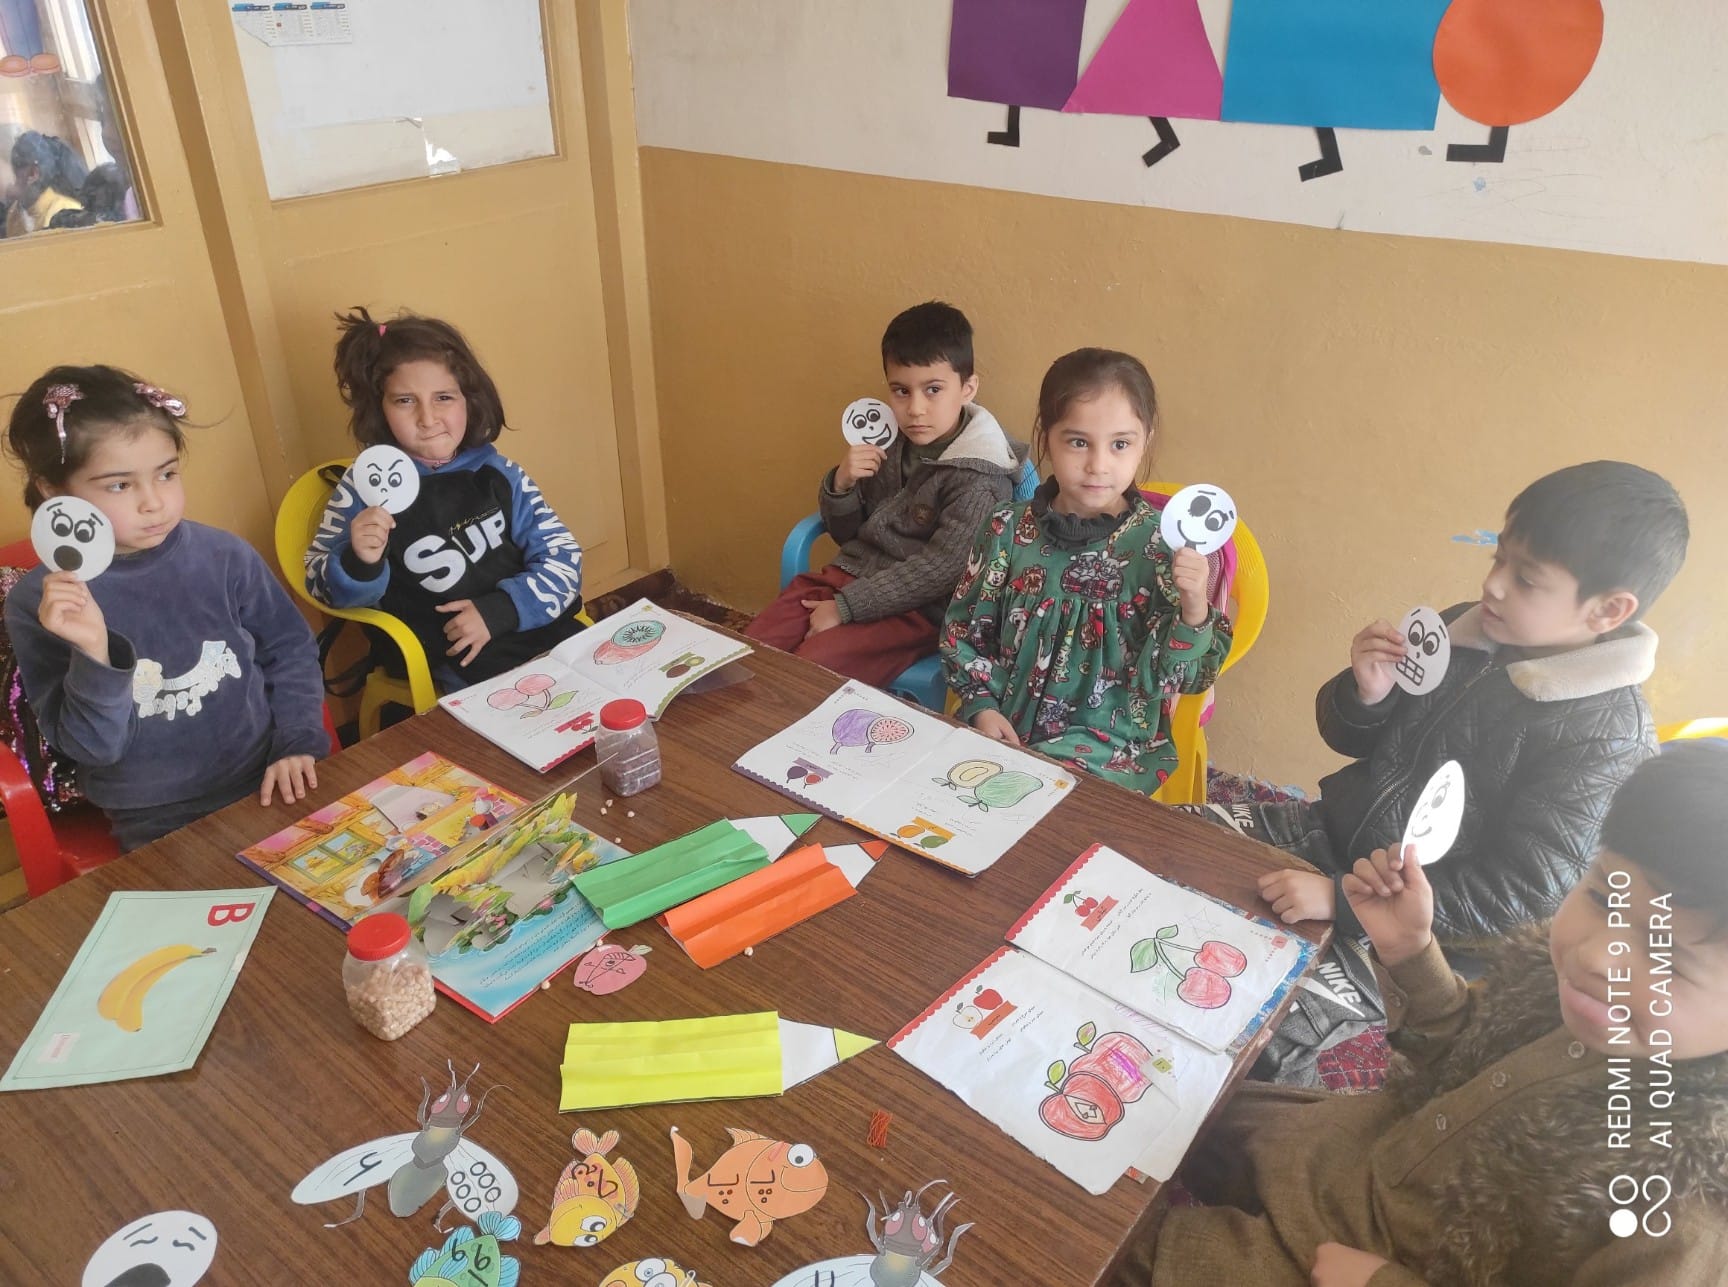 New Picture Of Children Seated At A Table Engaged In Learning Activities Such as Coloring And Writing to Update Our Family and Friends on Our Progress